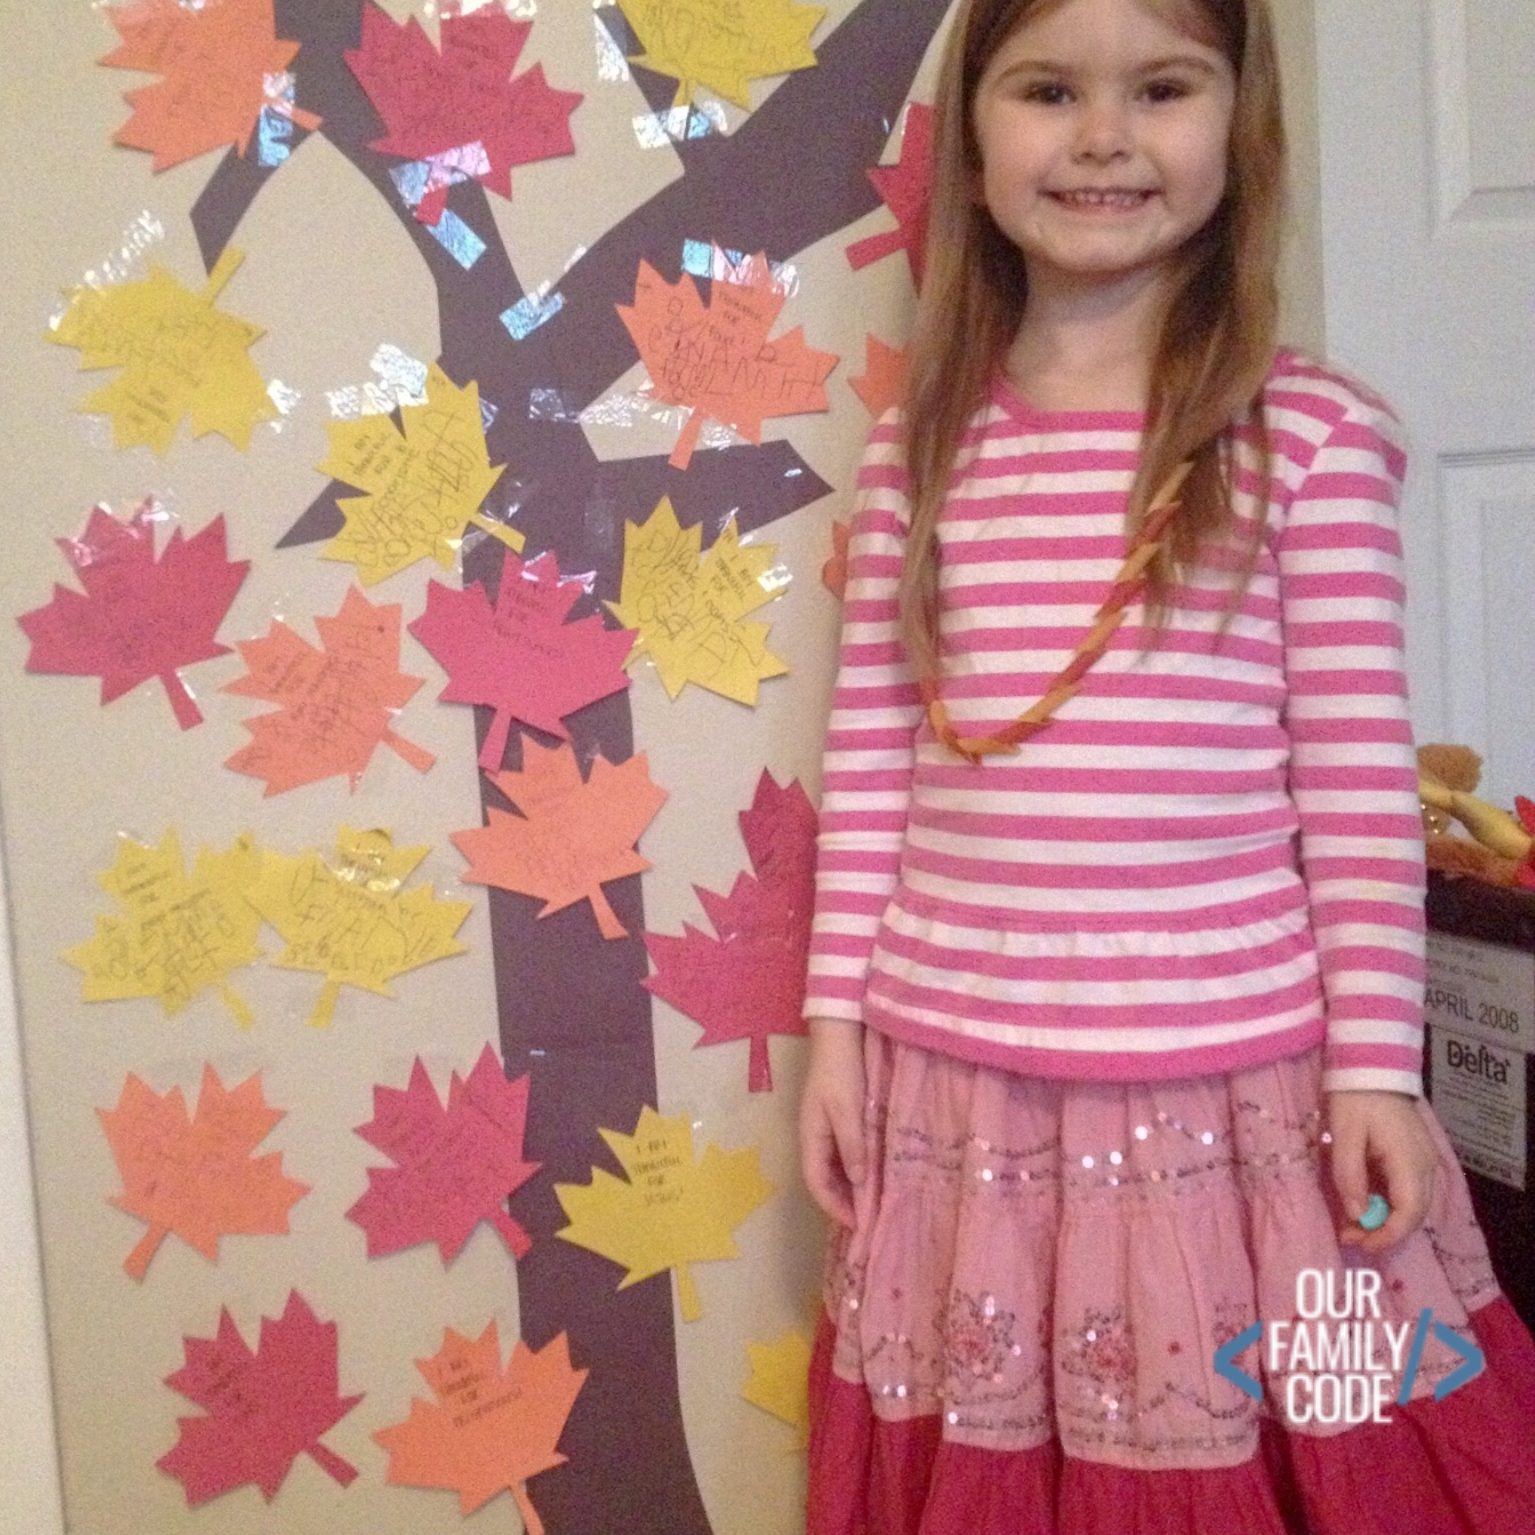 A picture of a preschooler standing next to a completed Thankful tree in the fall.